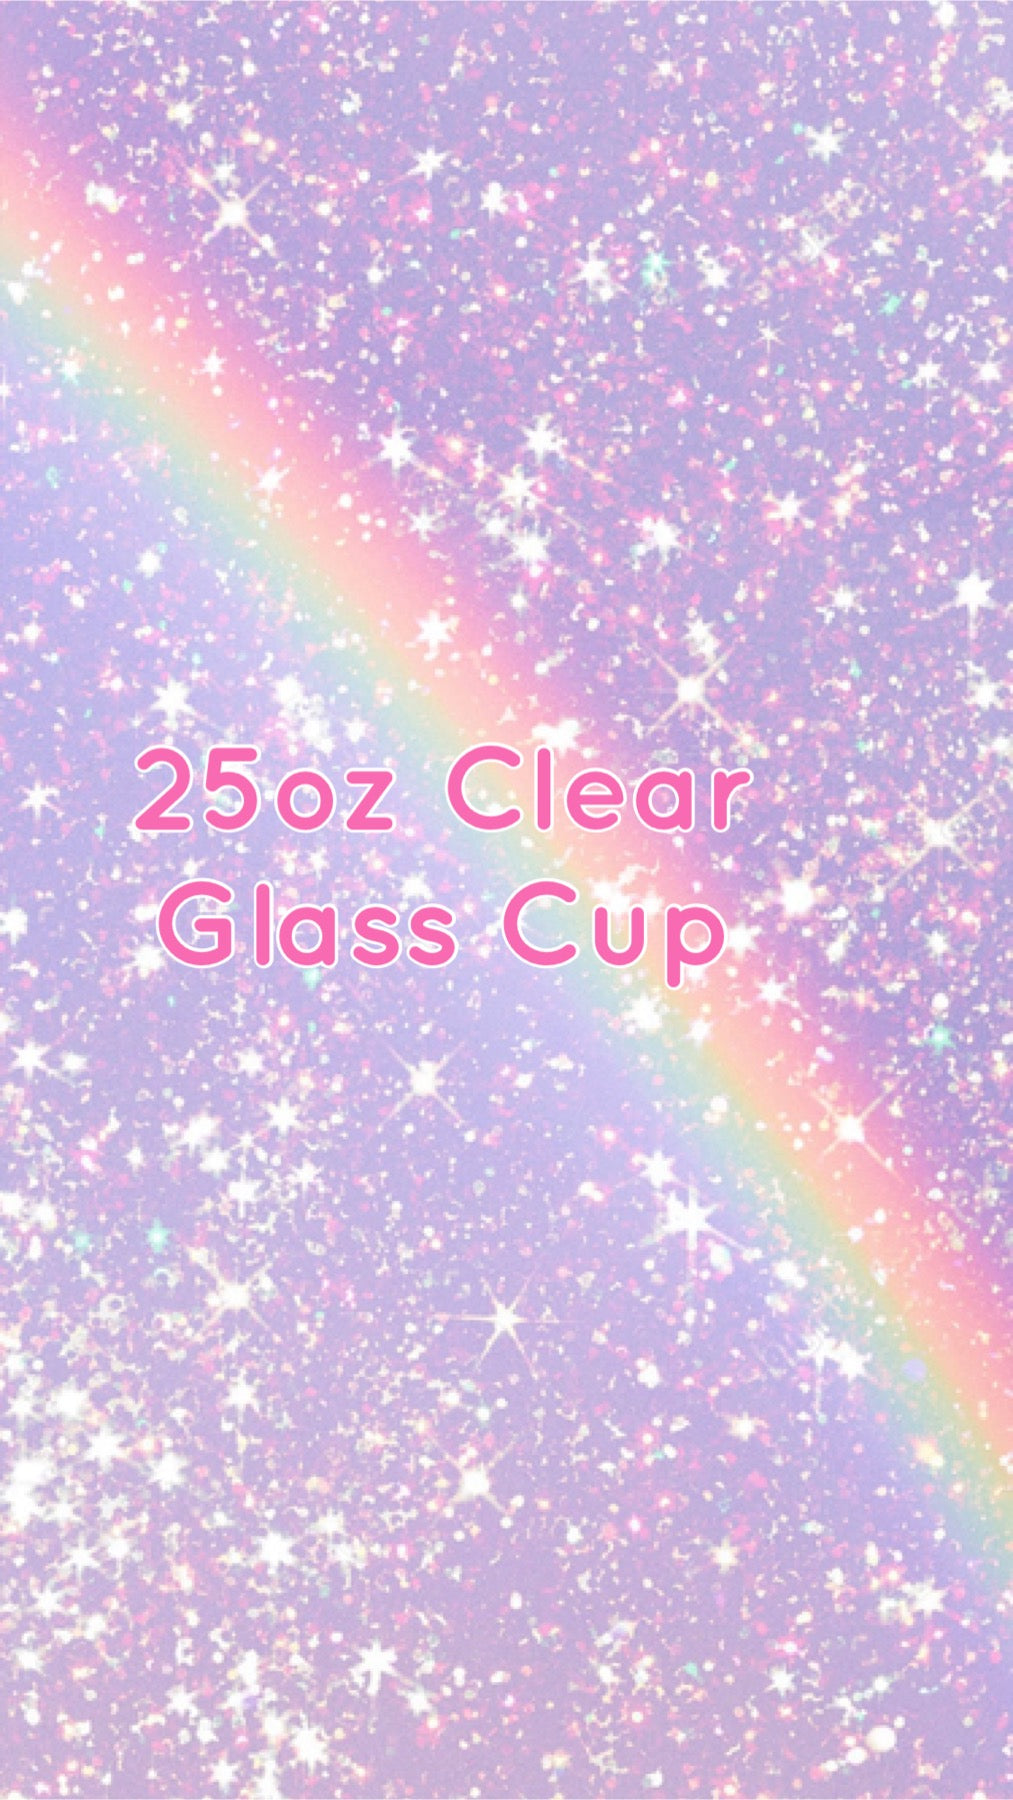 25oz Clear Glass Cup